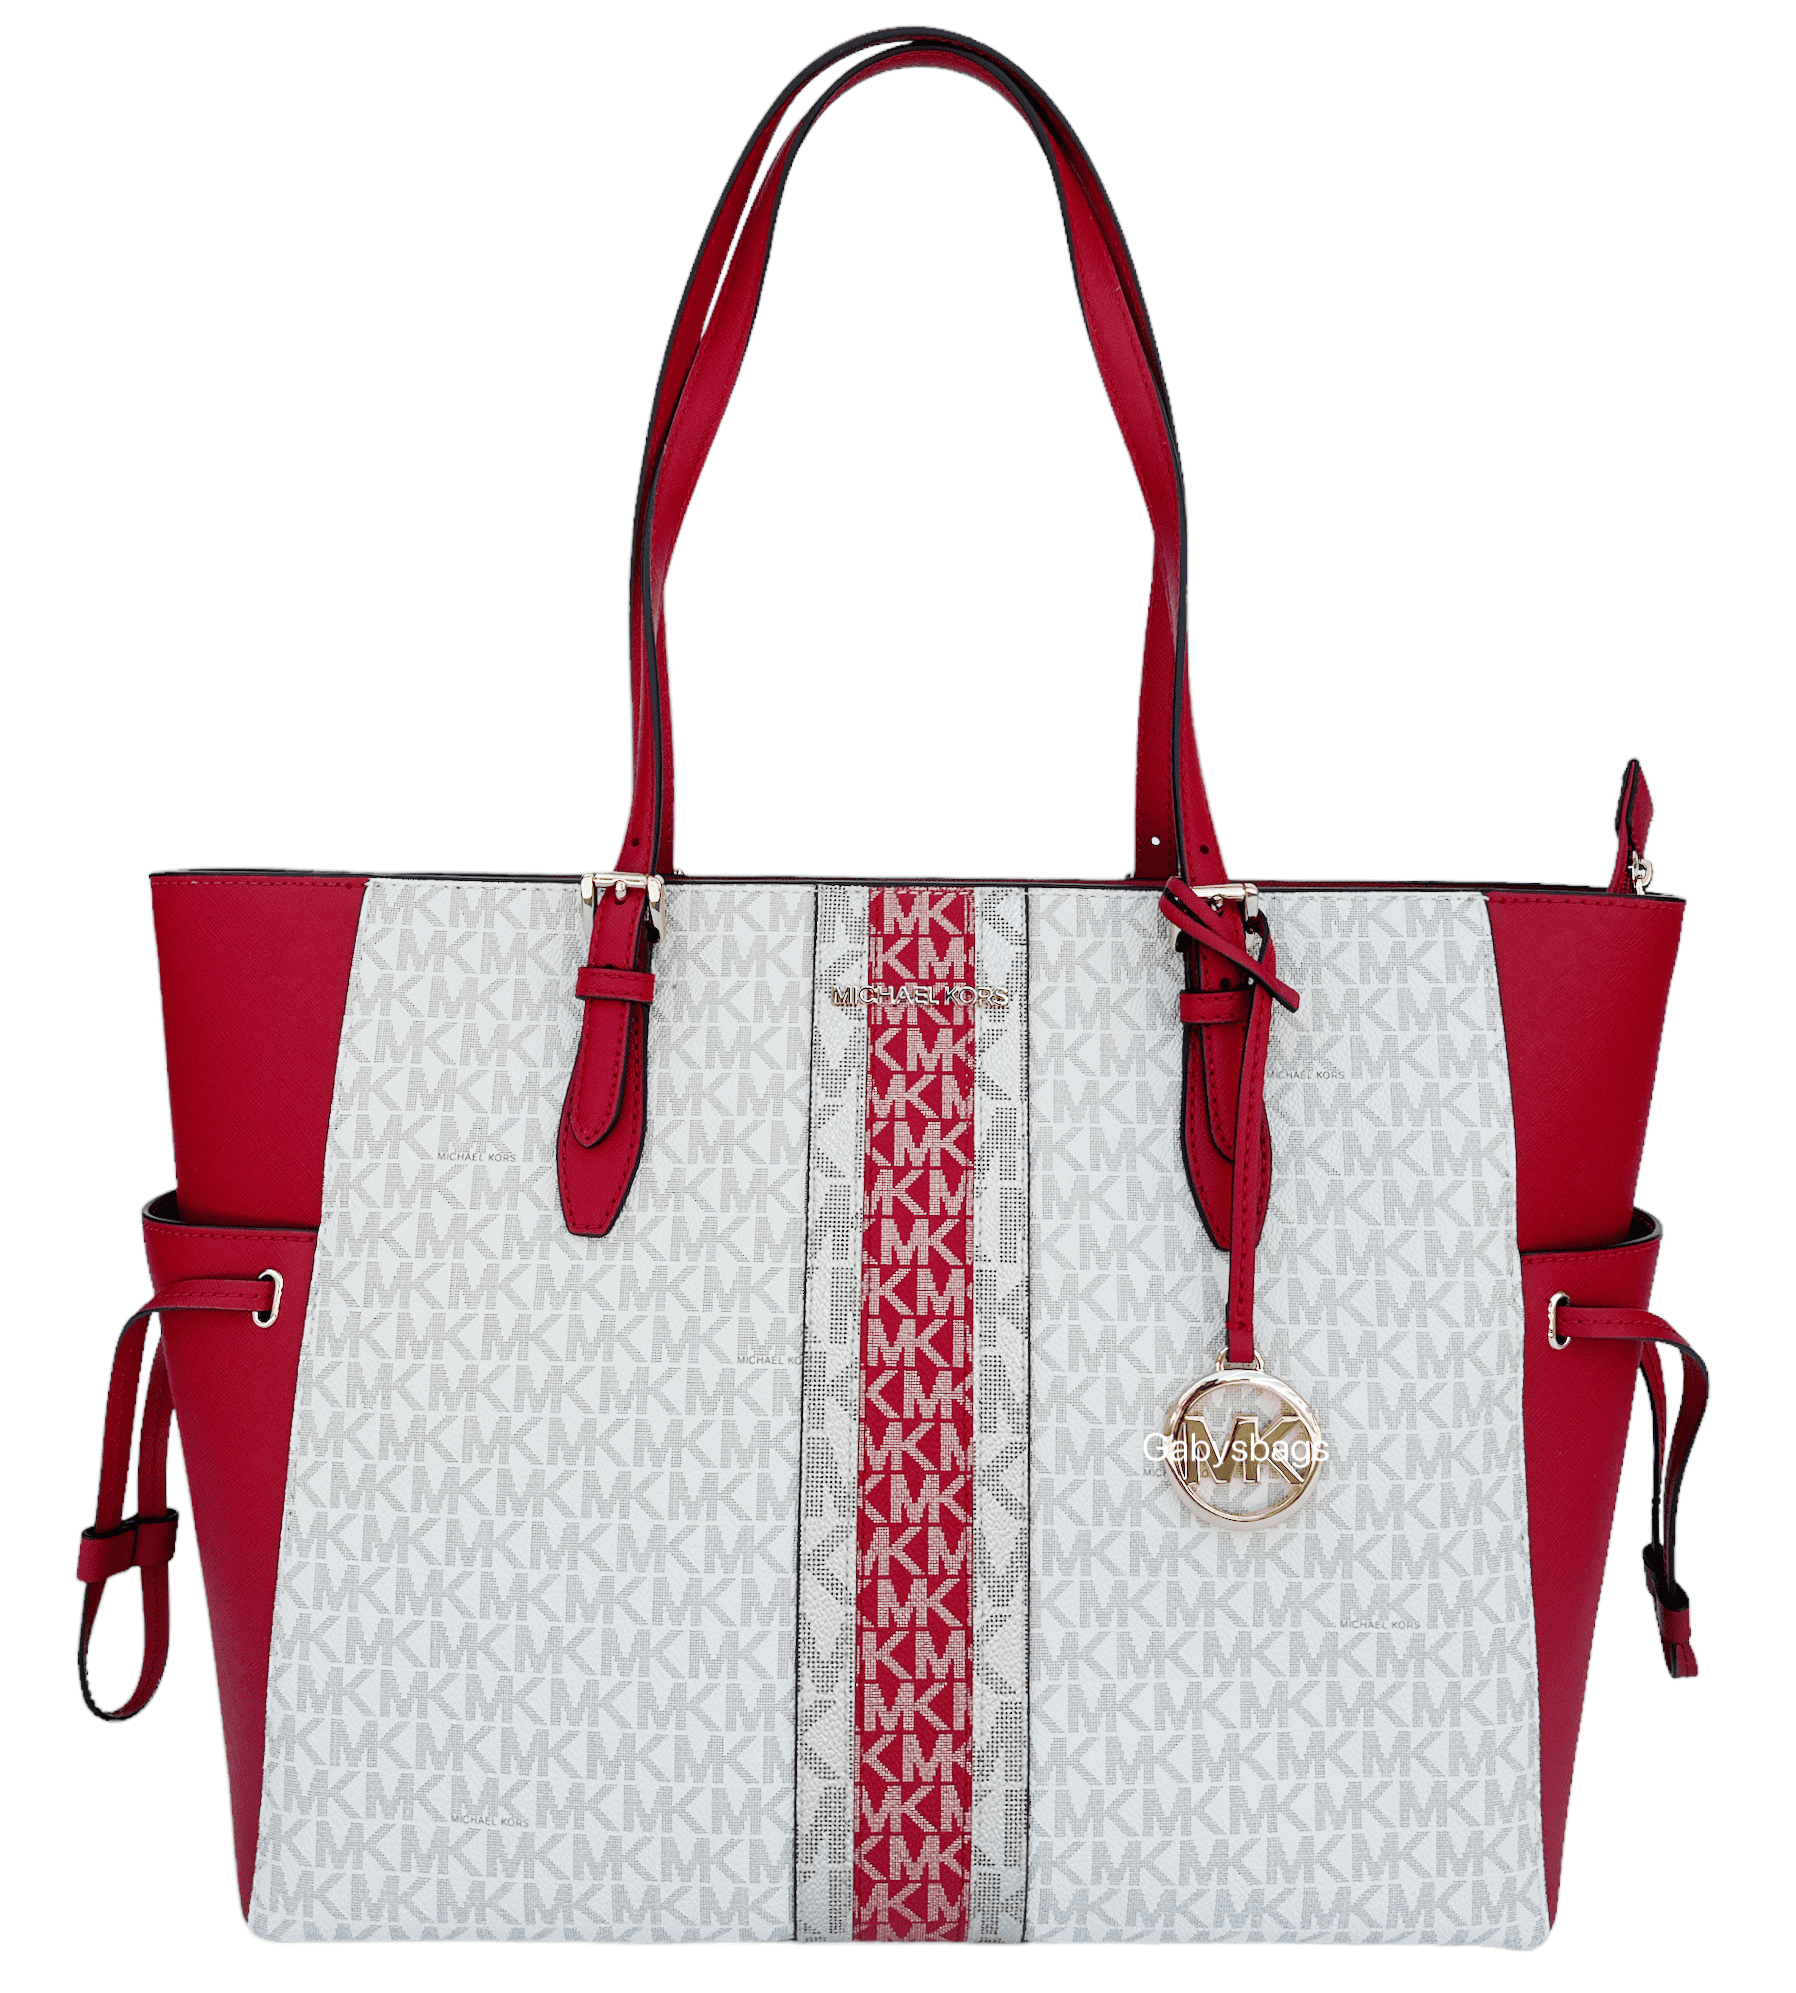 michael kors red and white striped tote replacement strap for wristlet -  Marwood VeneerMarwood Veneer